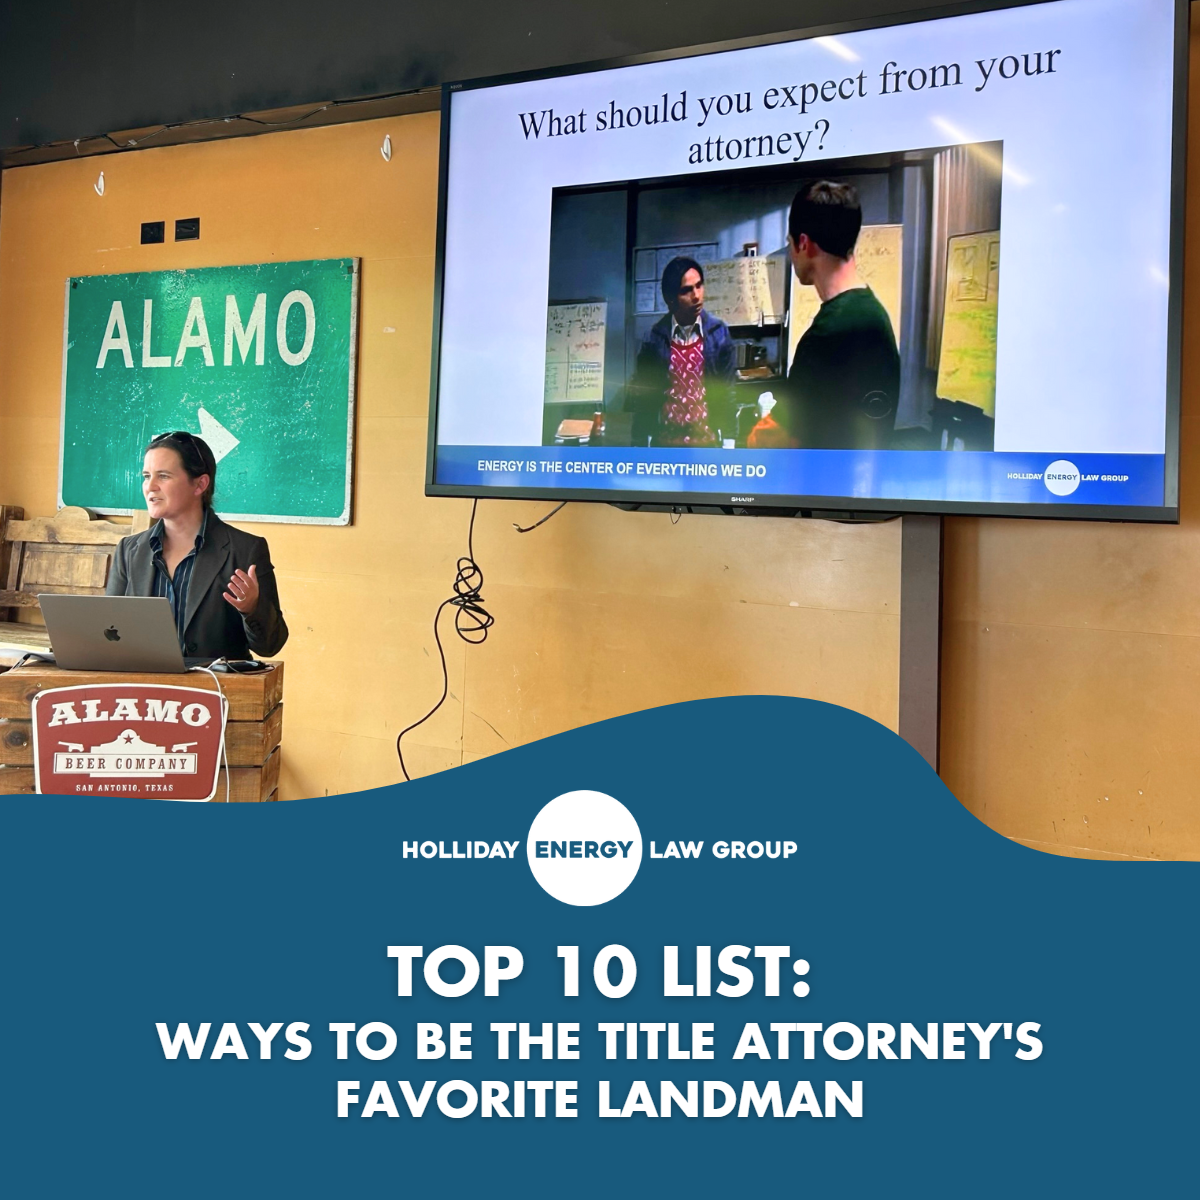 Top 10 List: Ways to be the Title Attorney's Favorite Landman